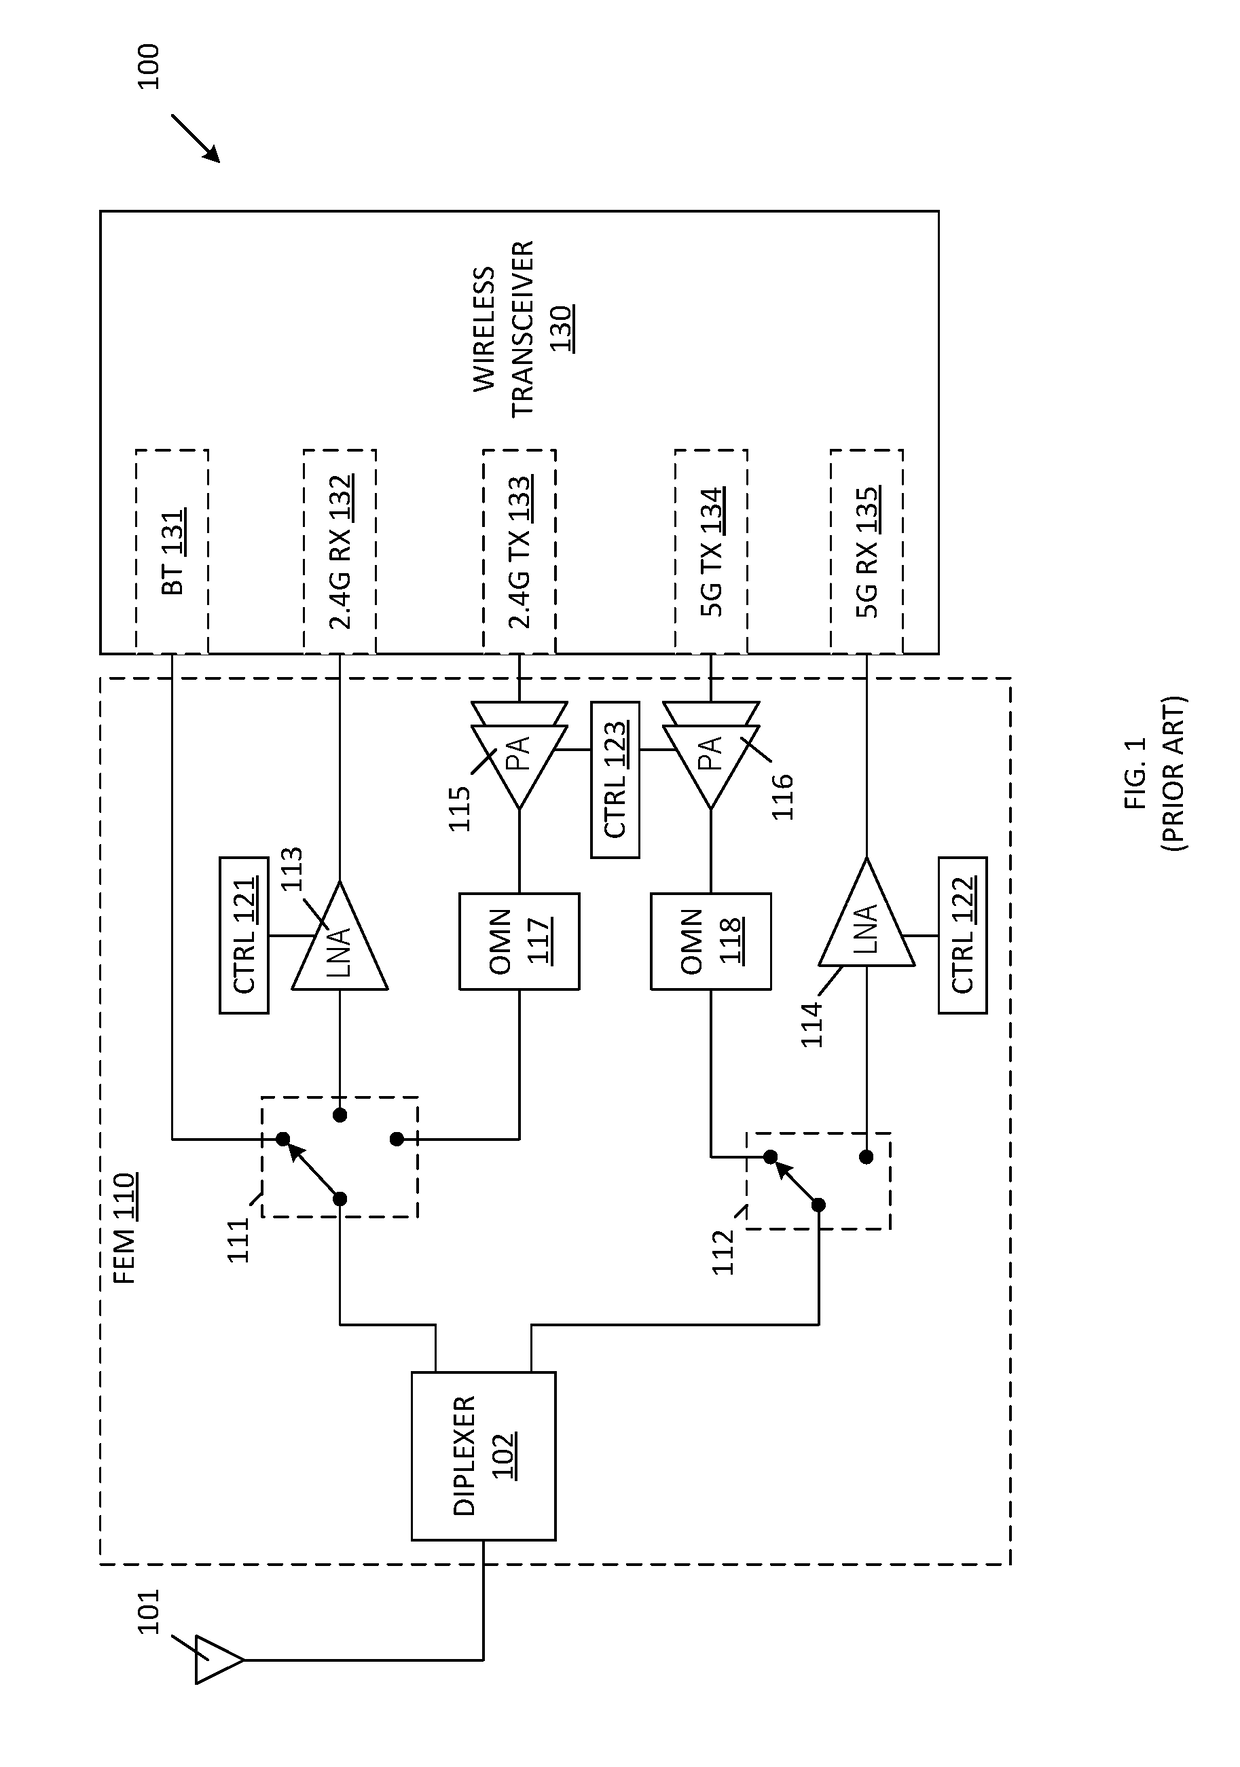 Substrate Isolation For Low-Loss Radio Frequency (RF) Circuits